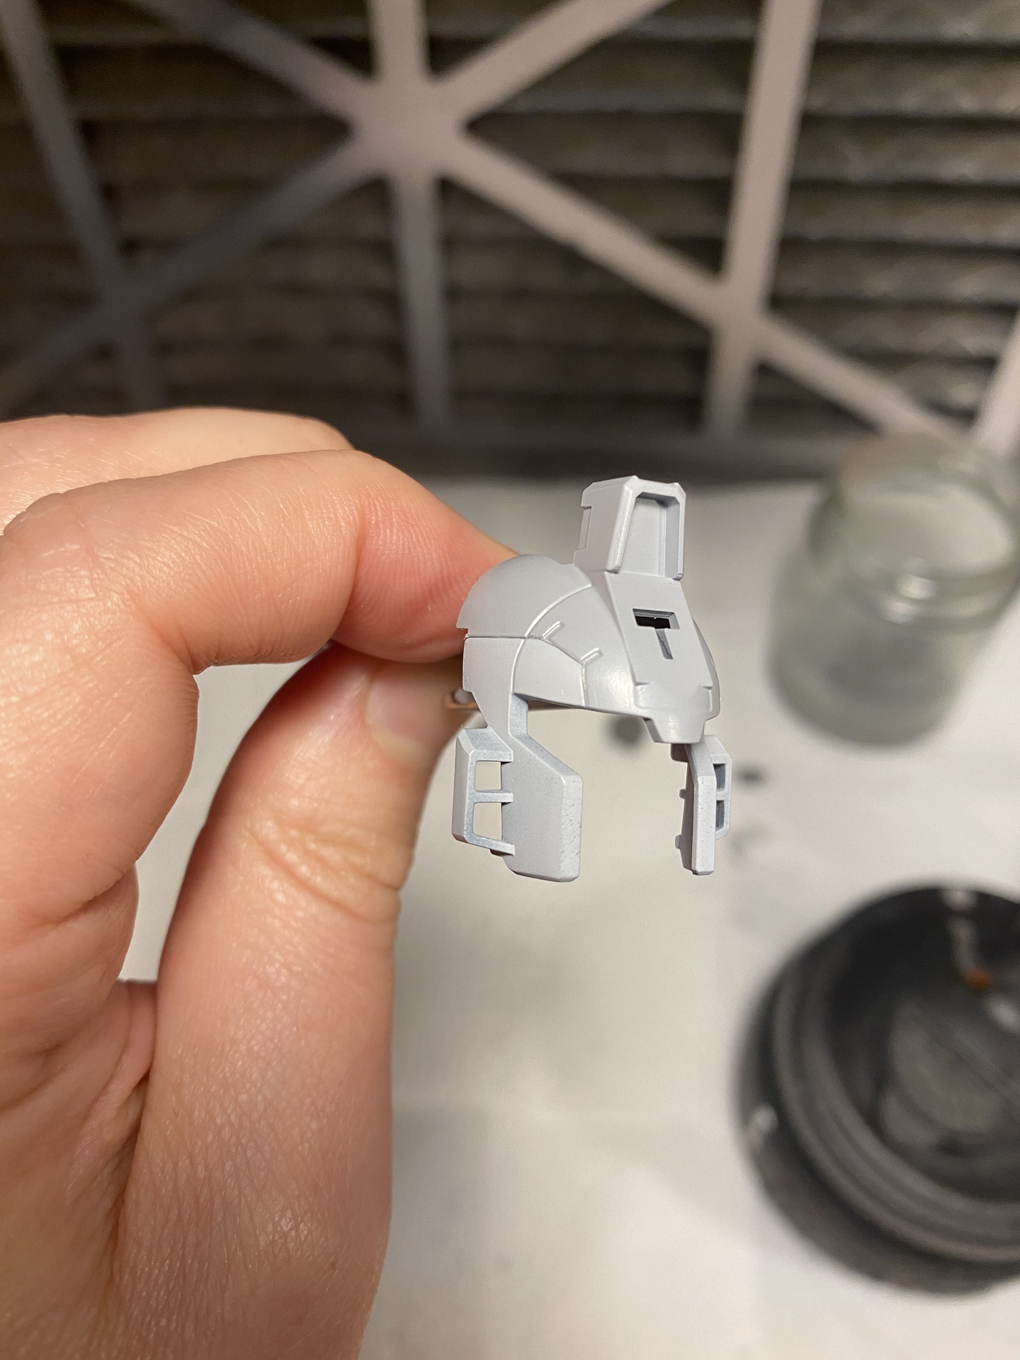 A piece of a Gunpla kit’s head, painted in two shades of gray to accent the head crest.